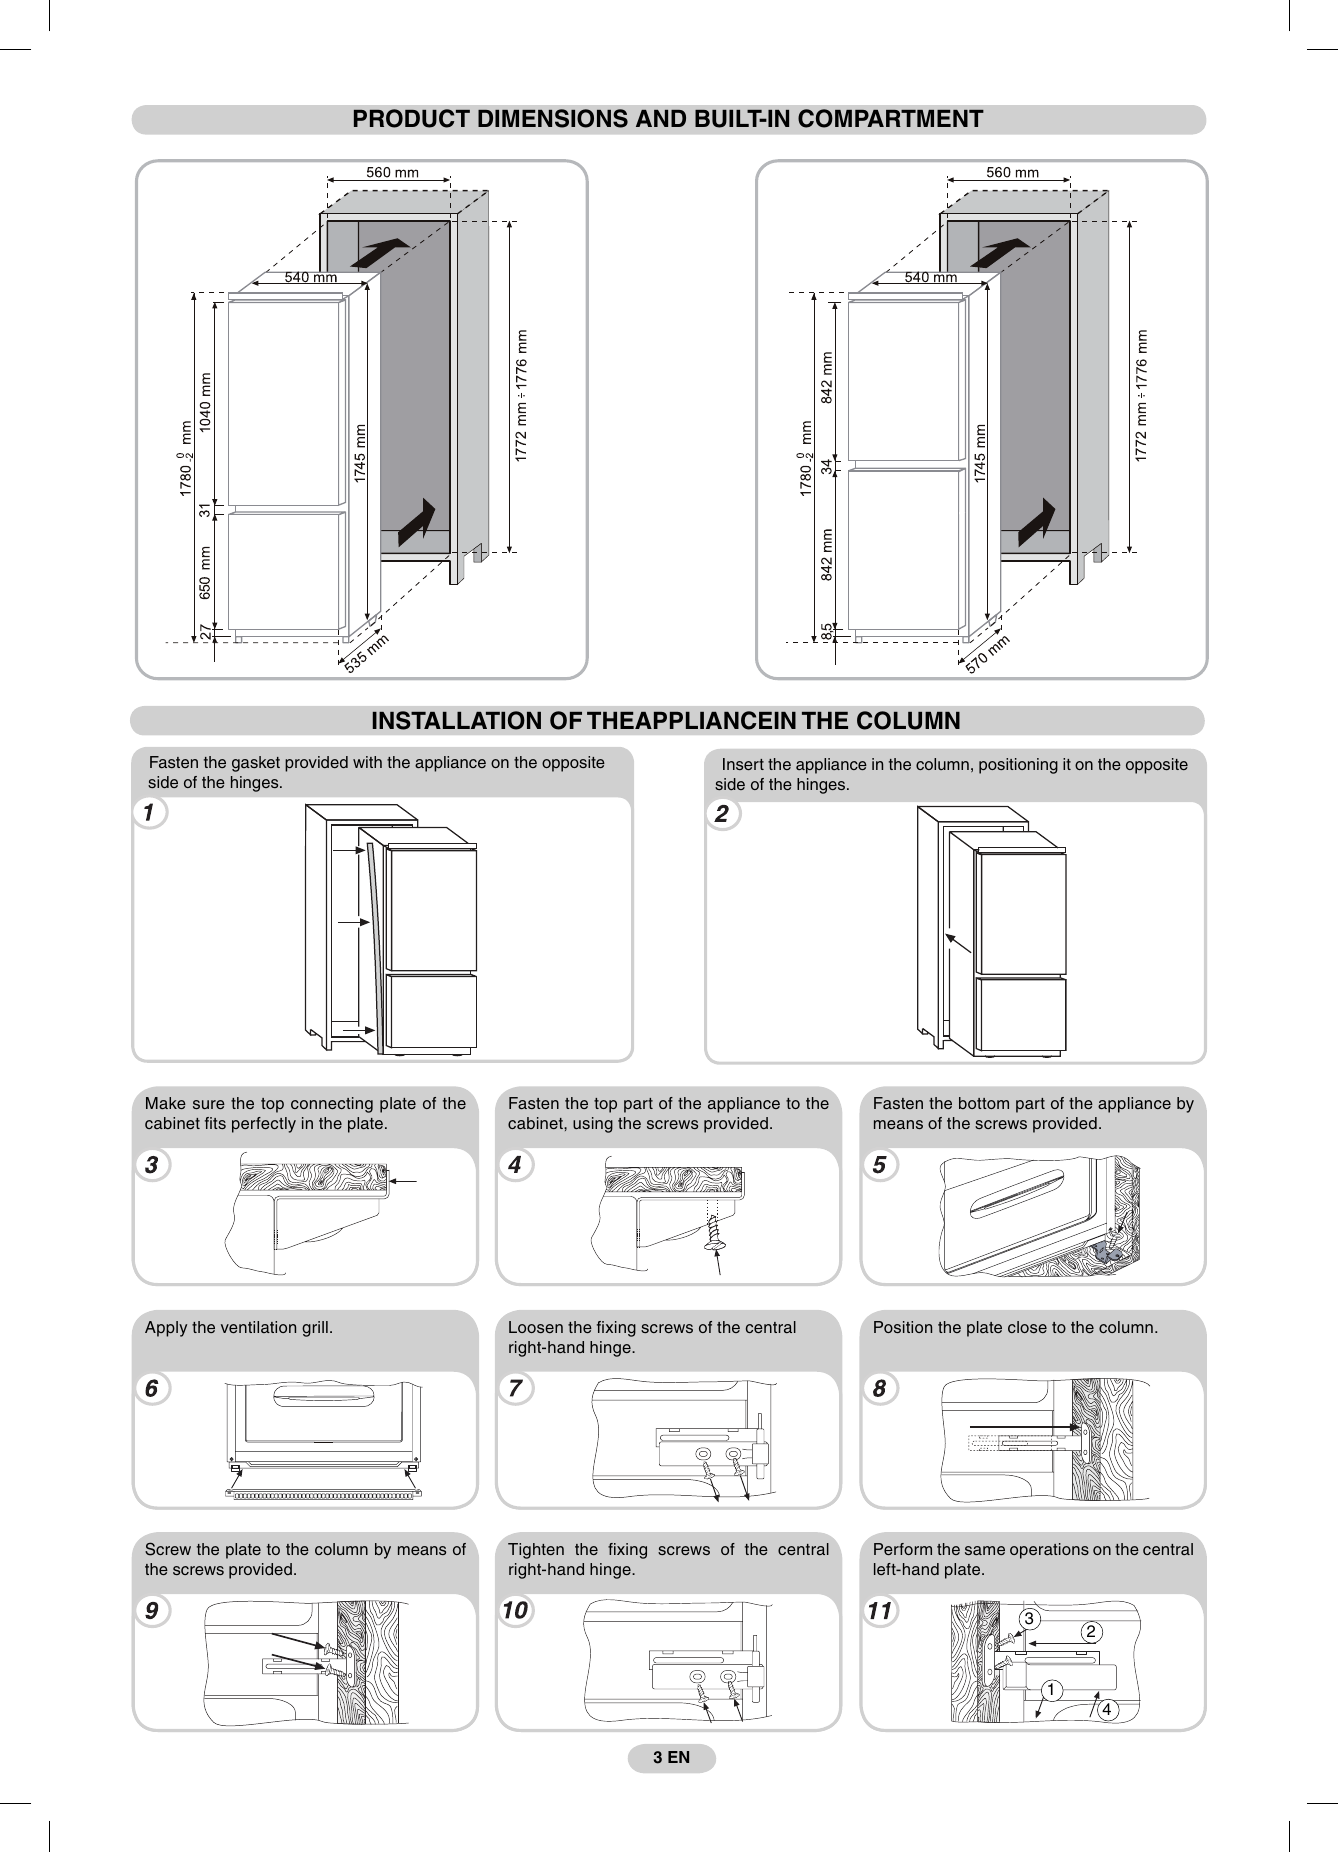 Page 4 of 5 - Hoover Frost Free Fully Integrated Fridge Freezer HFFB 3050AK Instruction Manual - Product Code 34900186 HFFB3050AK